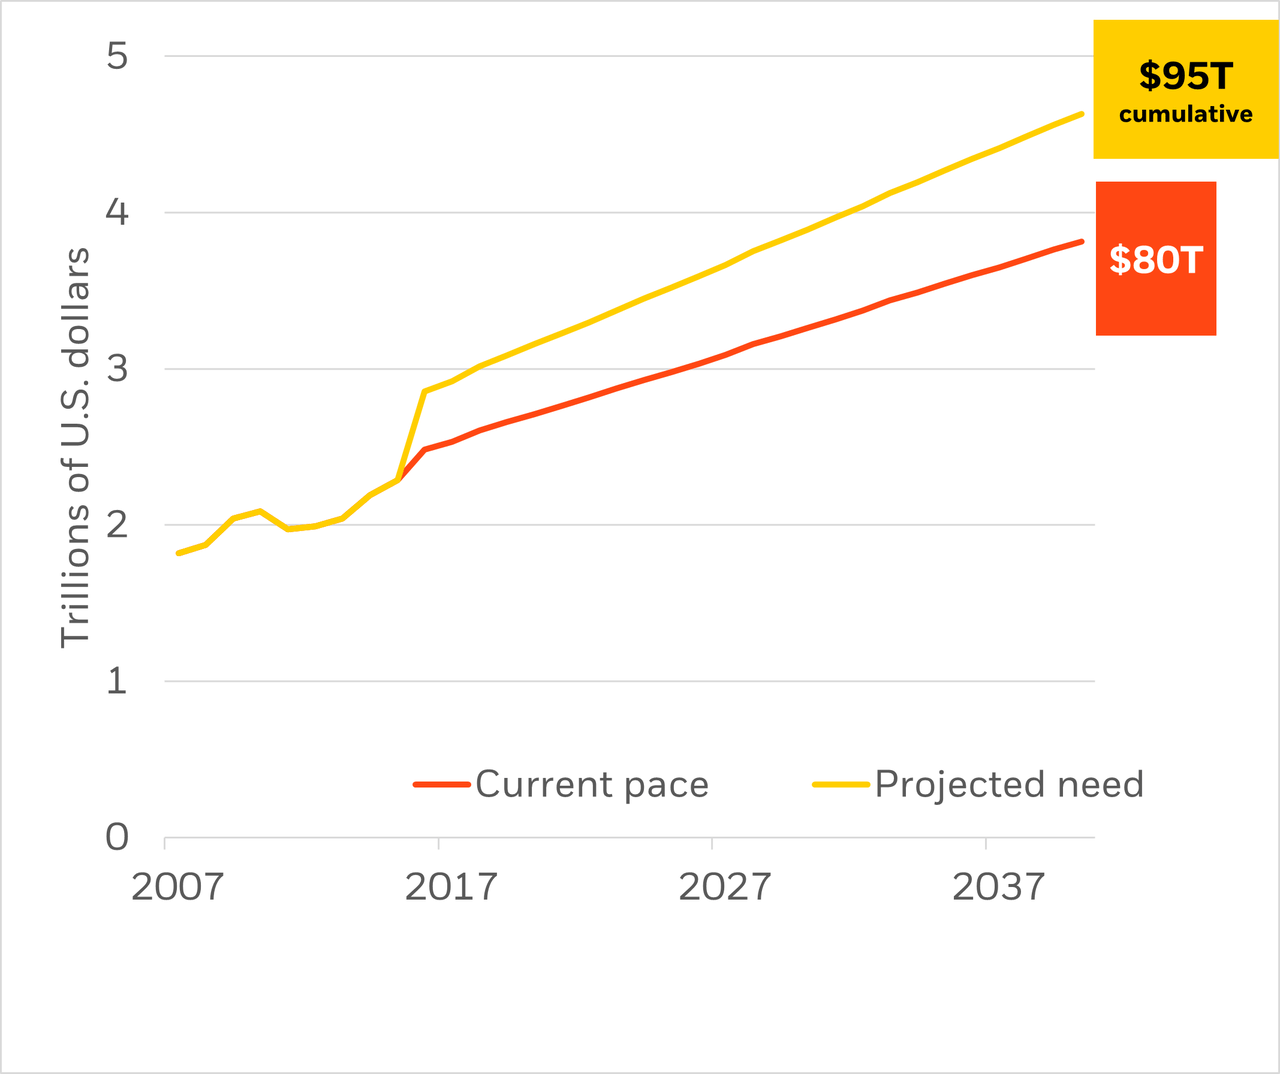 The chart shows estimated infrastructure investment for 50 countries through 2040. The yellow line shows investment needed annually. The orange line shows investment trends assuming countries invest in line with current trends. The cumulative total of $95 trillion is for investment needed vs. $80 trillion in current trends. Forward-looking estimates may not come to pass.